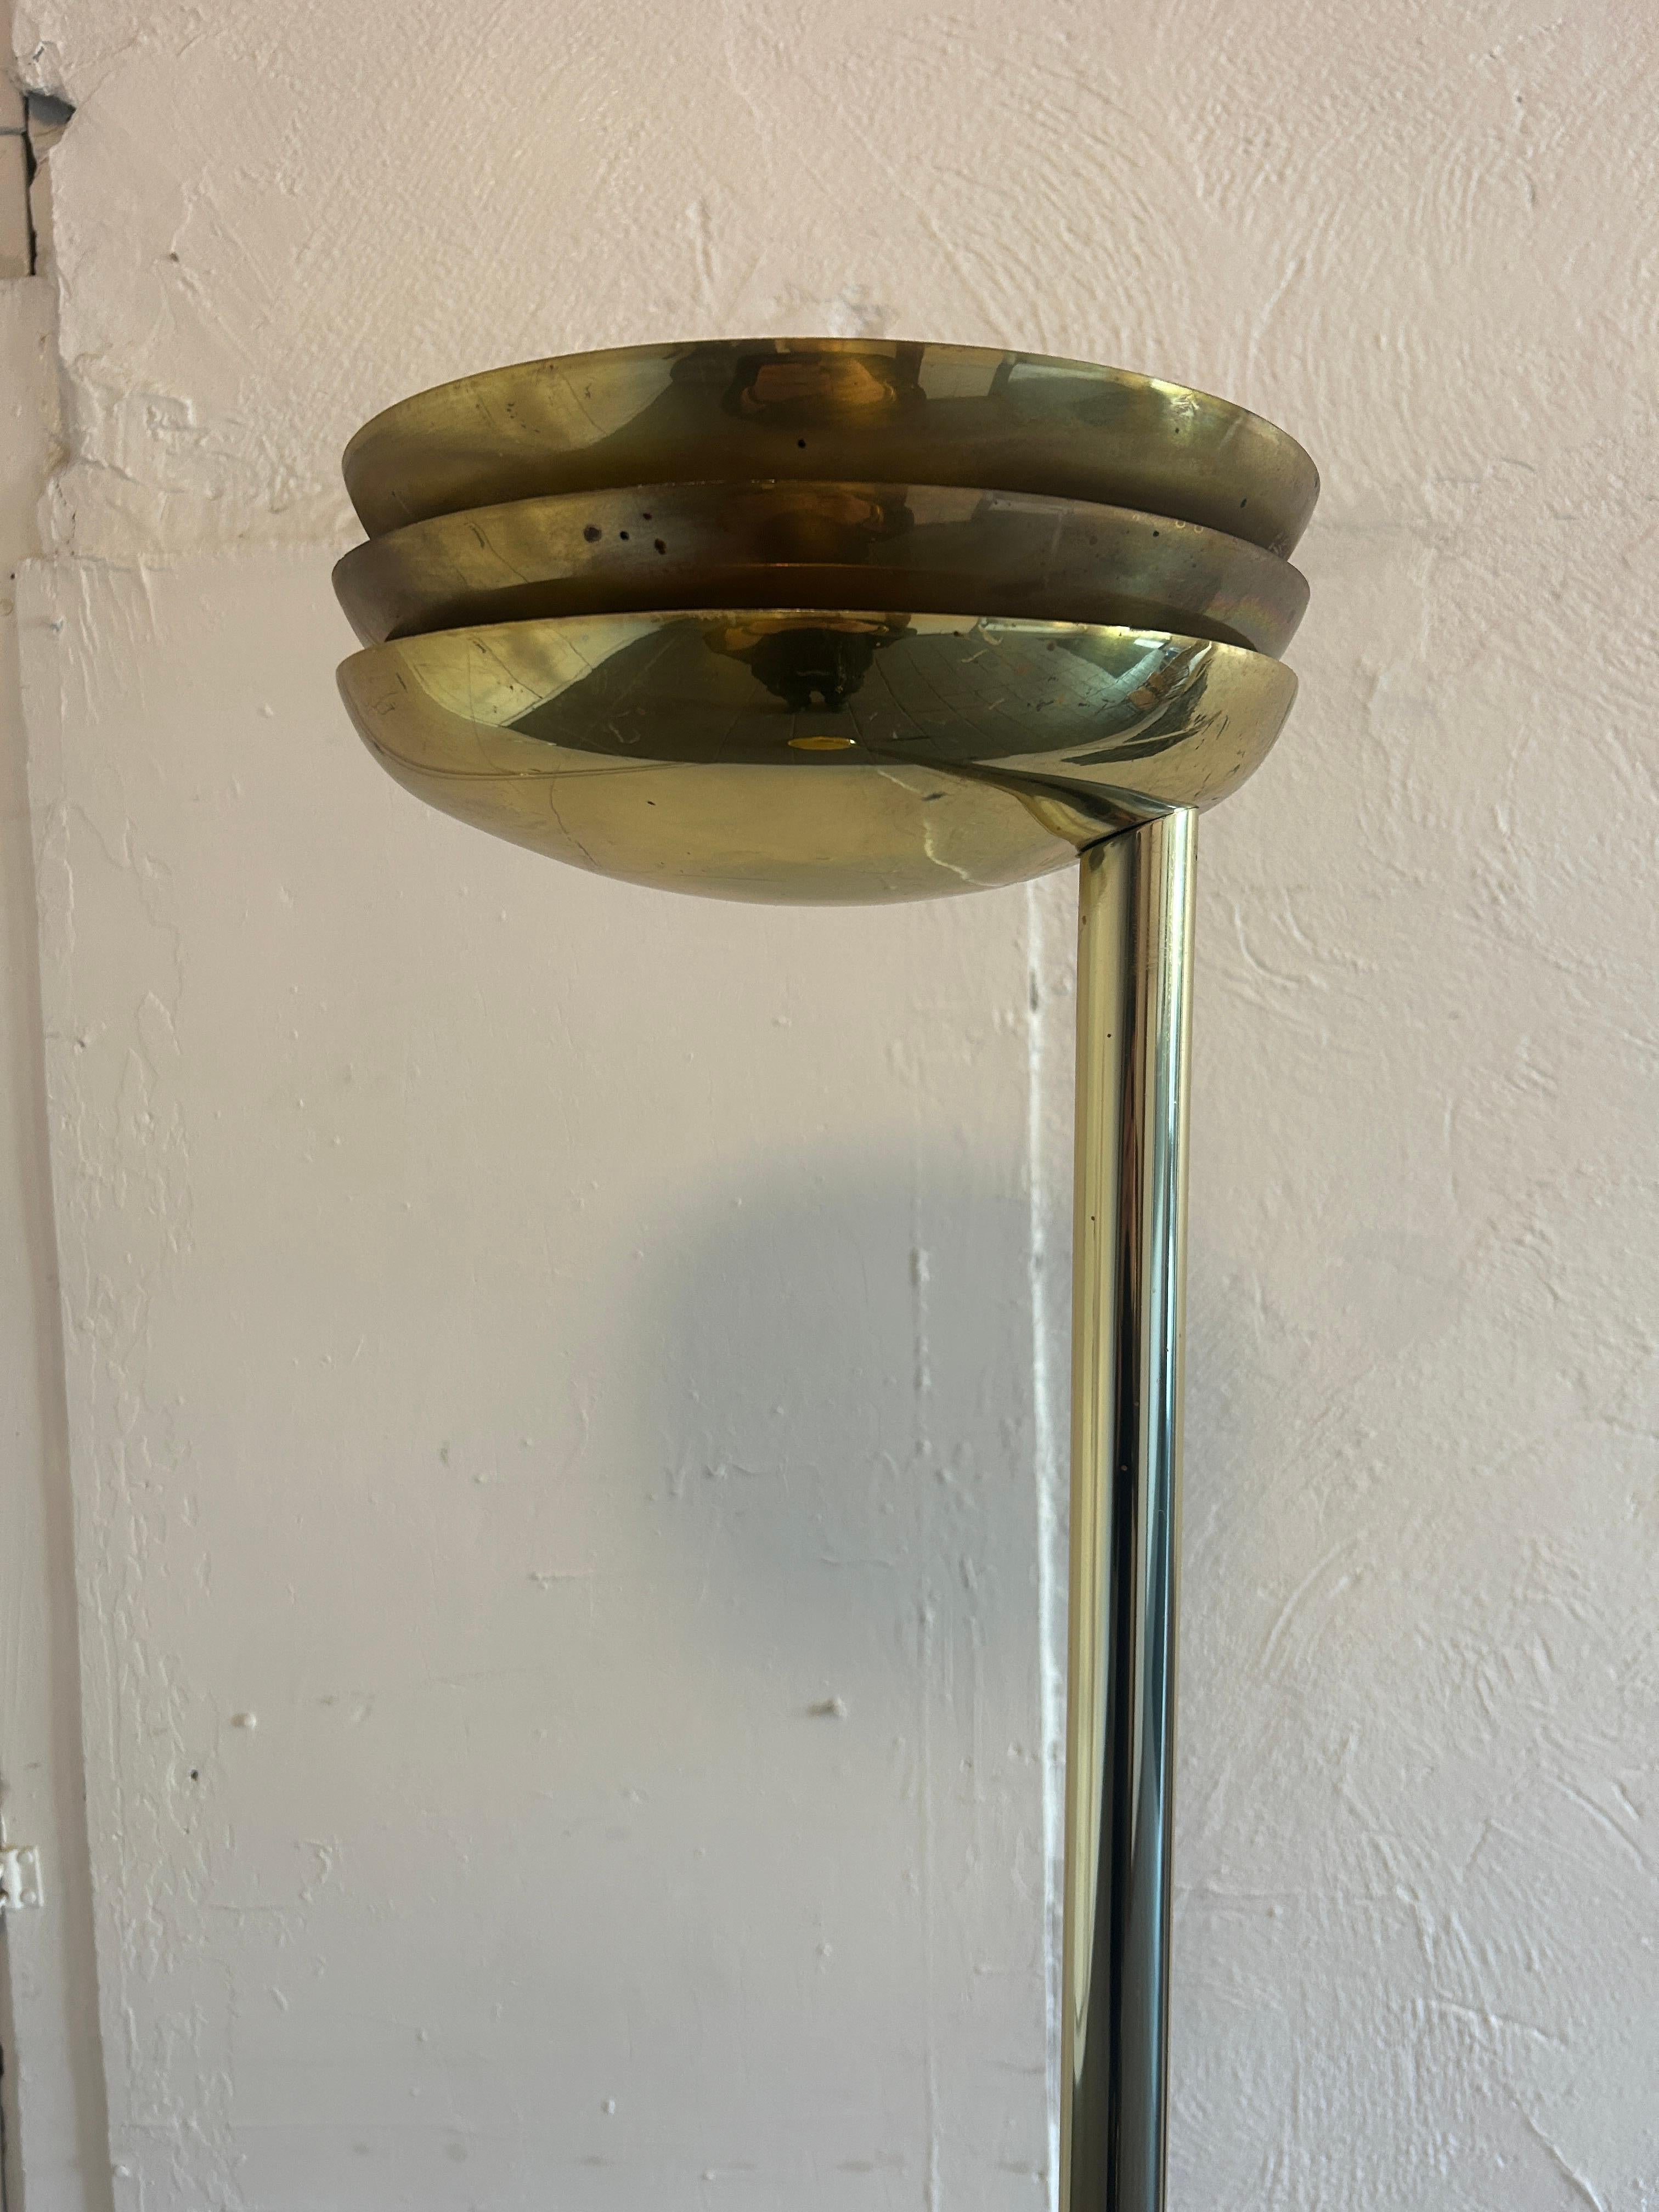 Post modern midcentury gold chrome vented tall torch floor lamp. Halogen Bulb Lights upward as seen in photo. Great 1980s floor Lamp. Located in Brooklyn NYC. 

120v American Plug.

Works 100%